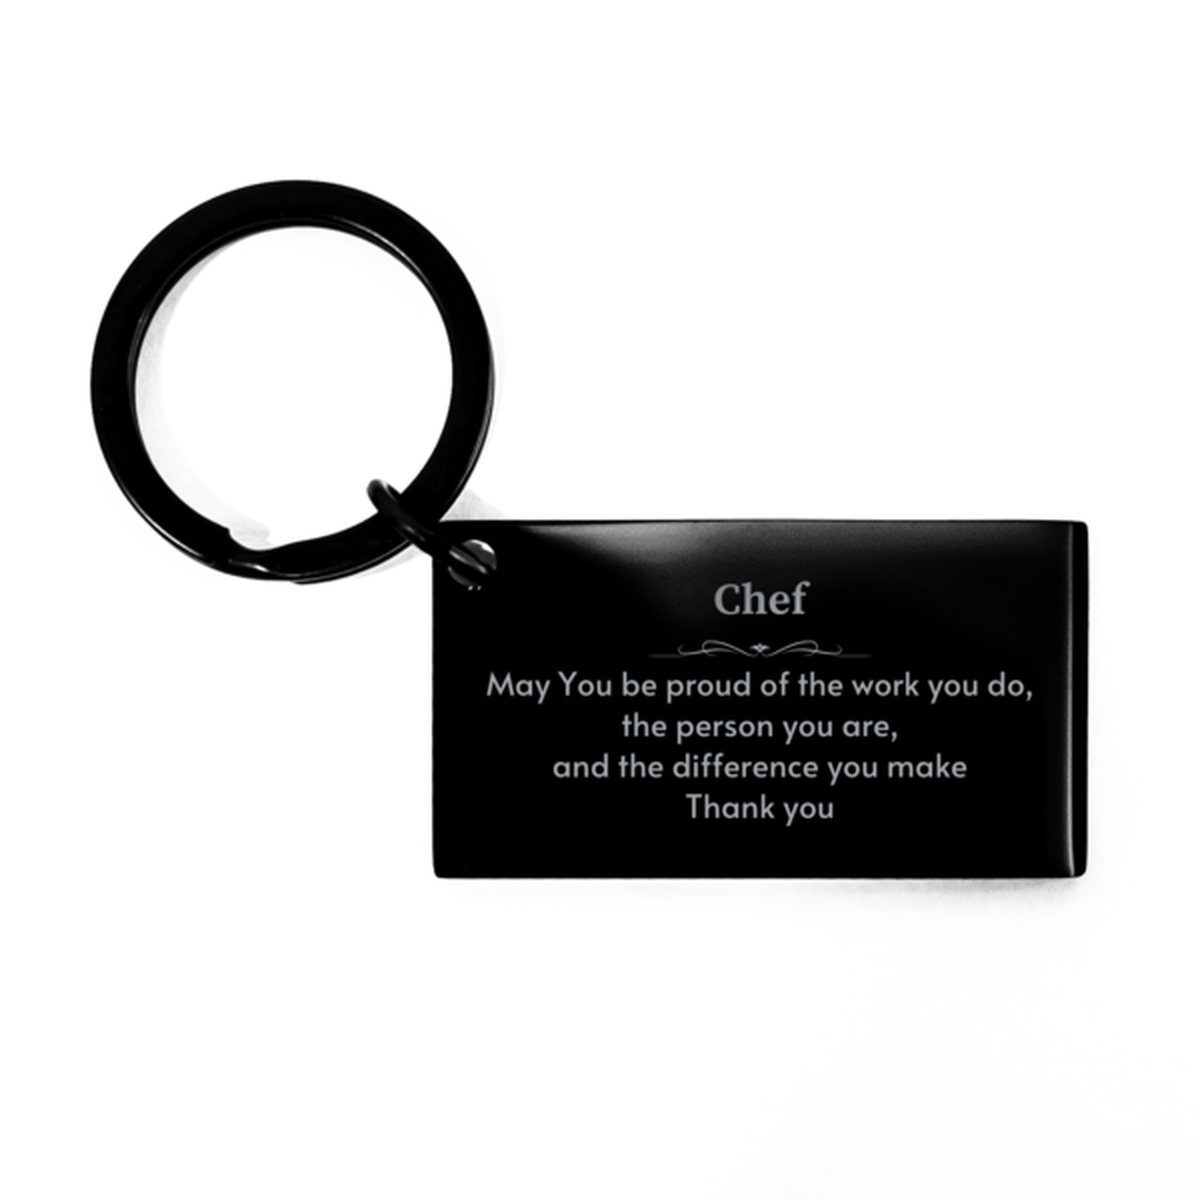 Heartwarming Keychain Retirement Coworkers Gifts for Chef, Detective May You be proud of the work you do, the person you are Gifts for Boss Men Women Friends